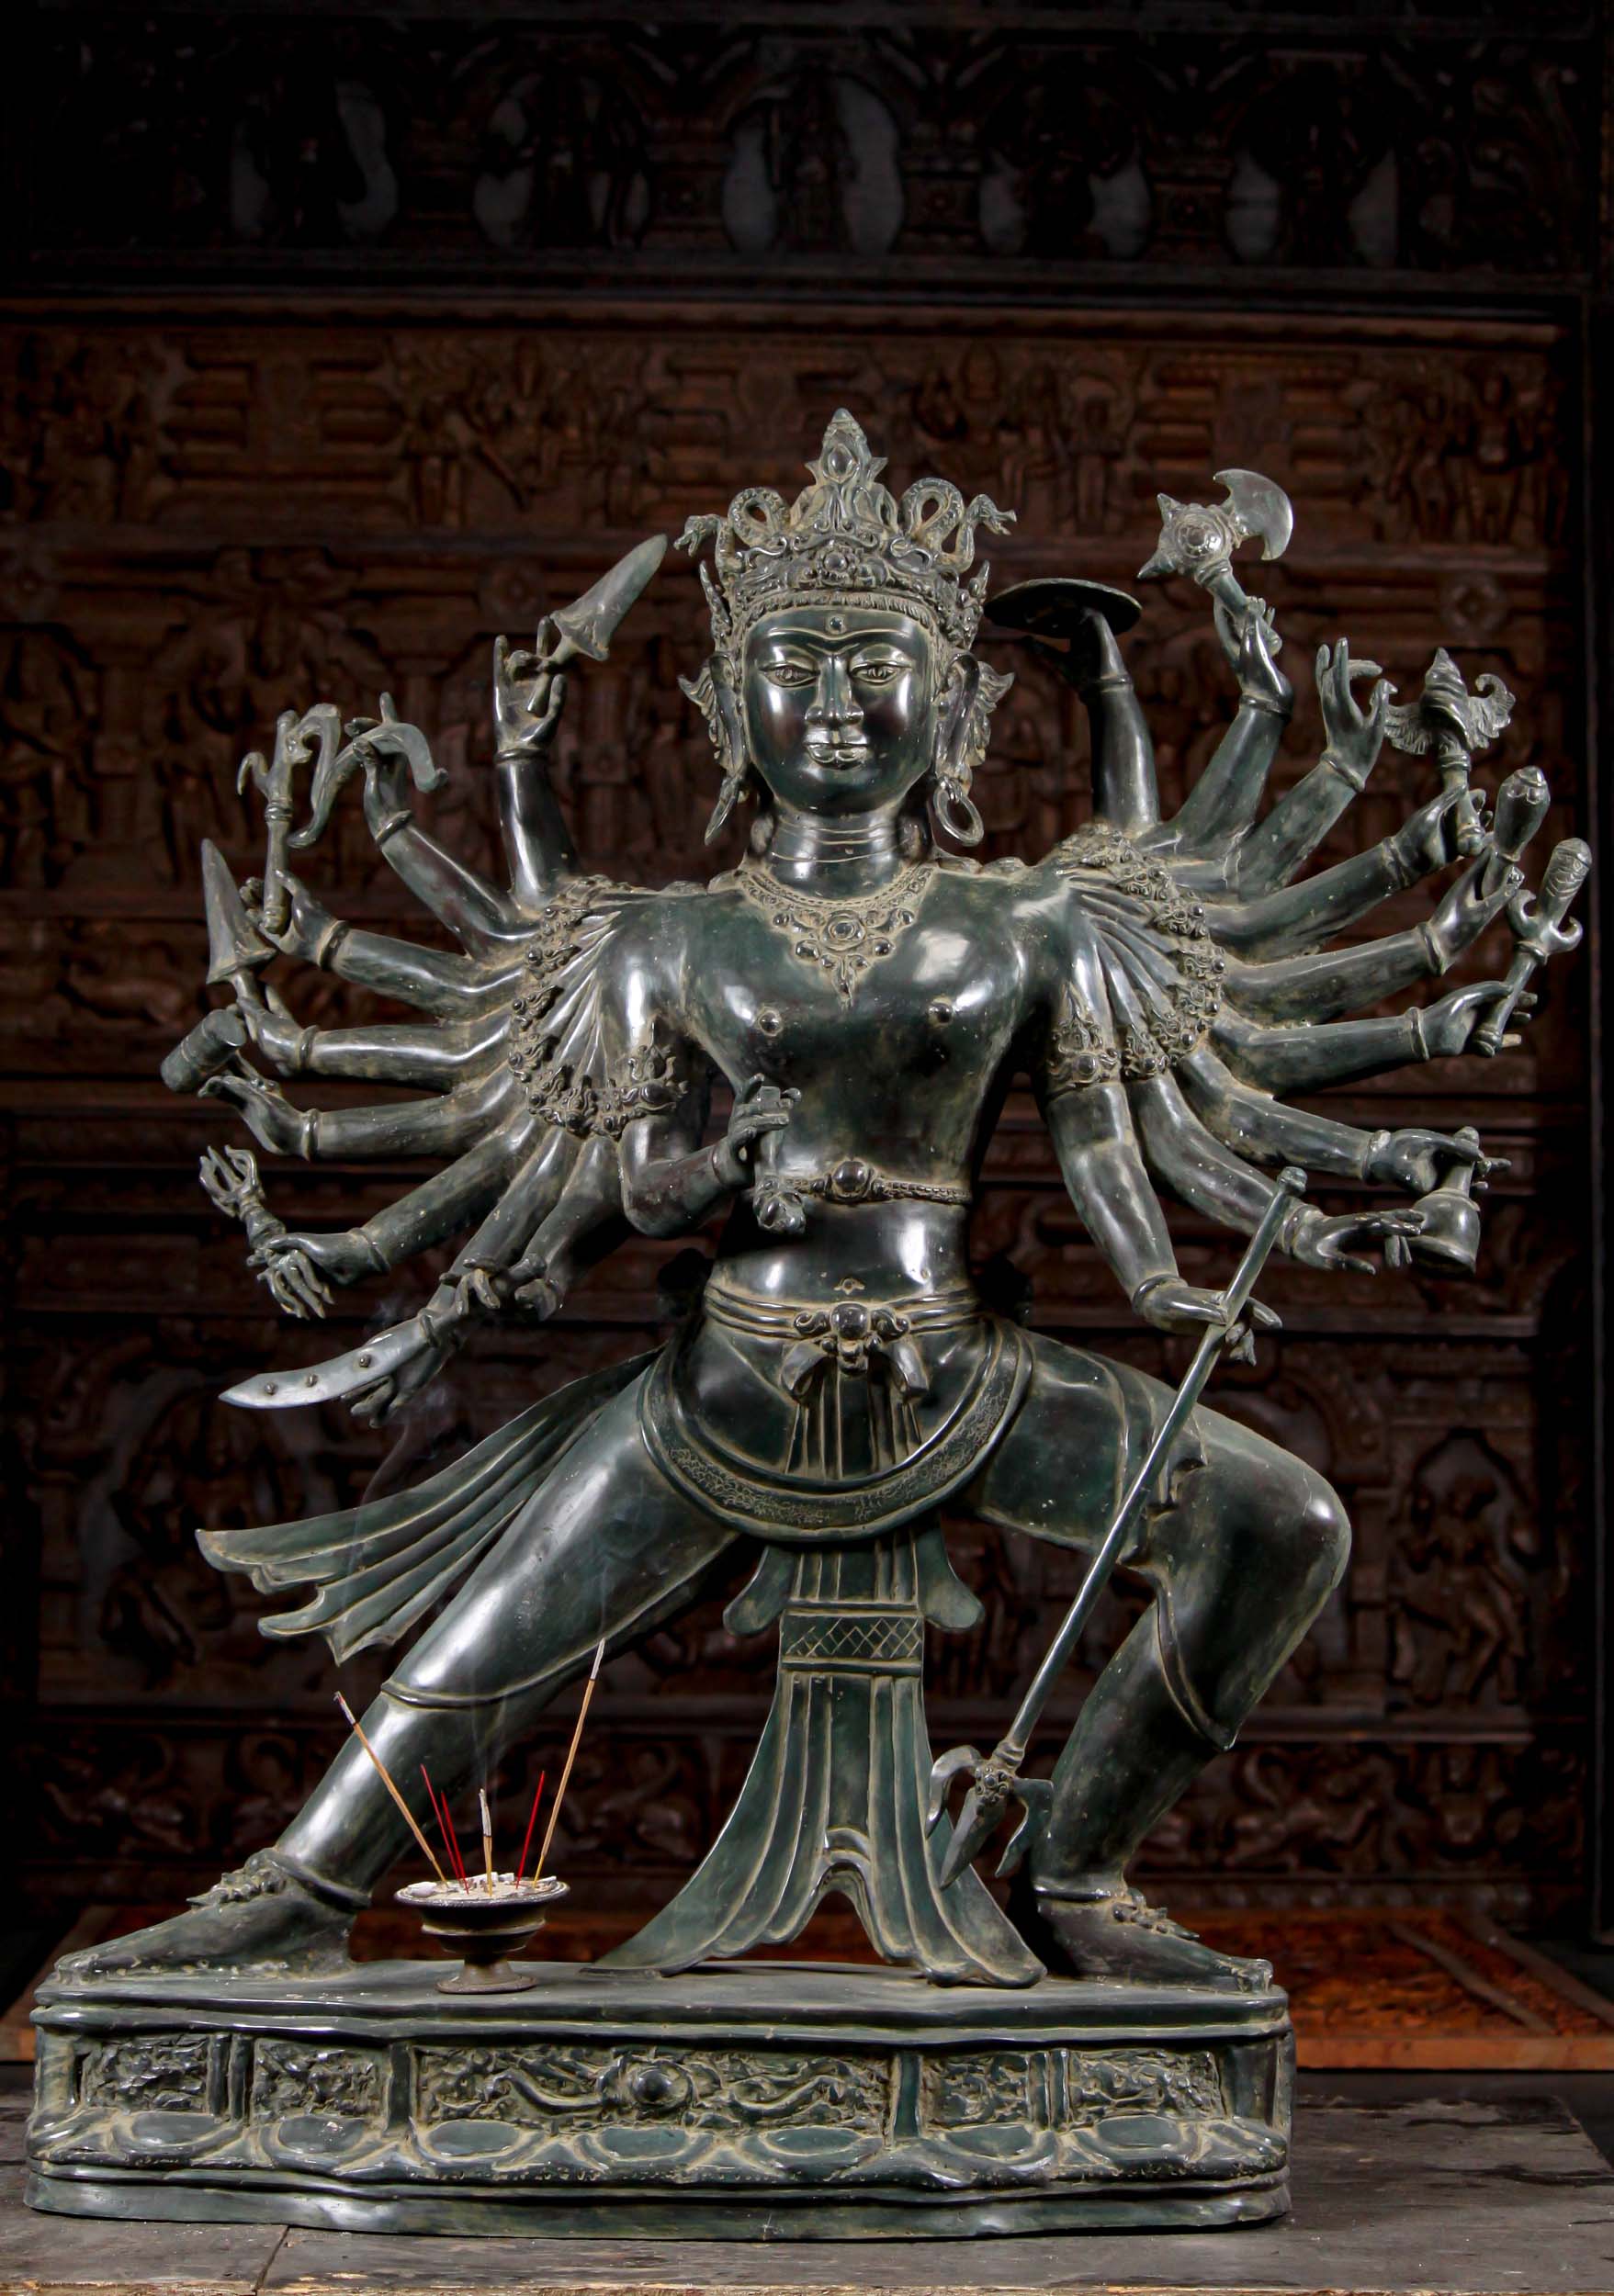 Awesome Brass Dancing Shiva Sculpture With 18 Arms Holding A Variety Of Weapons 45 127bb5z